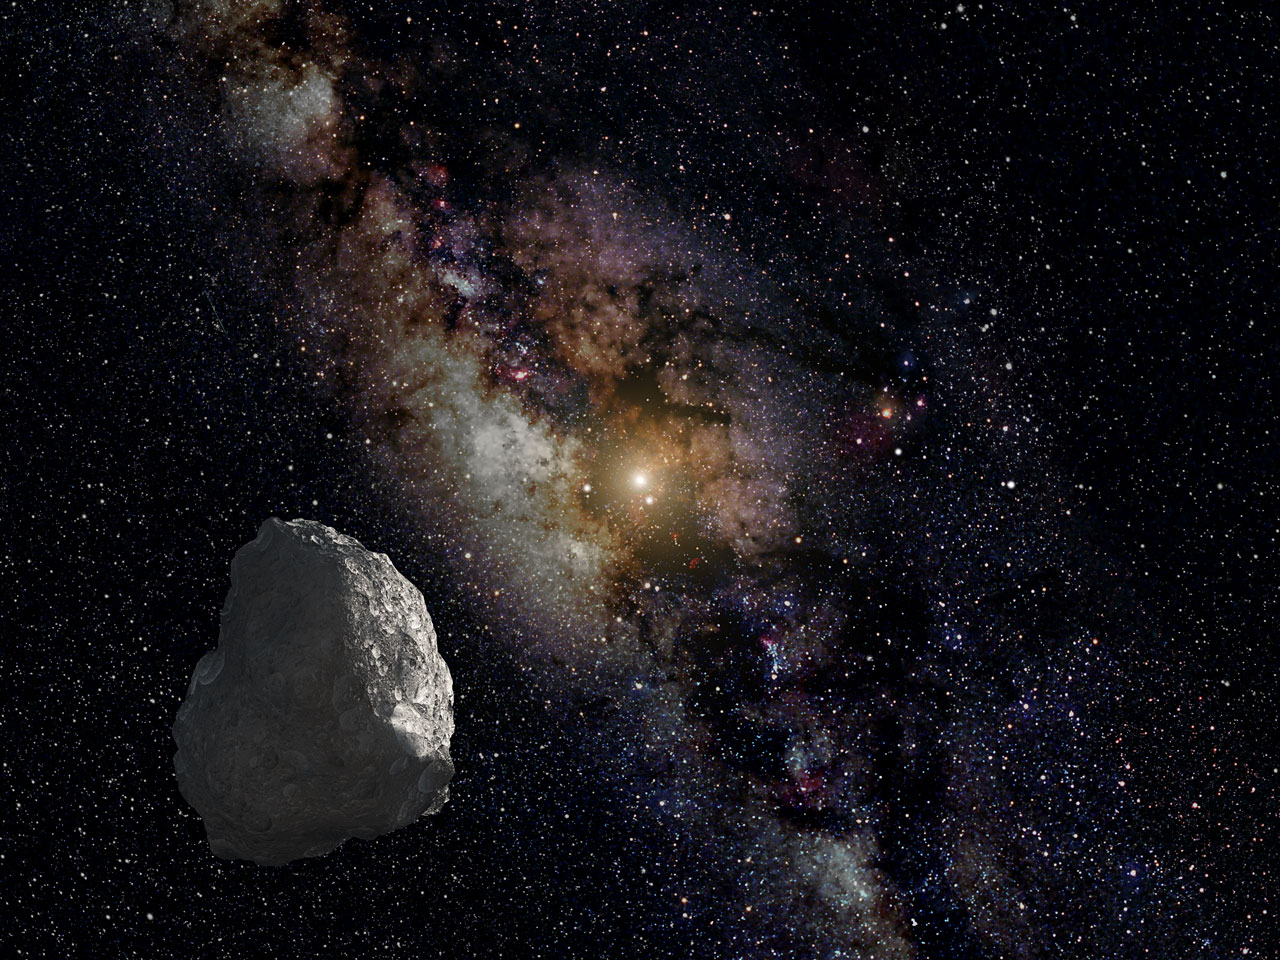 An artist's impression of a Kuiper Belt object, located on the outer rim of our Solar System, where Niku was discovered. Credit: NASA, ESA, and G. Bacon (STScI)